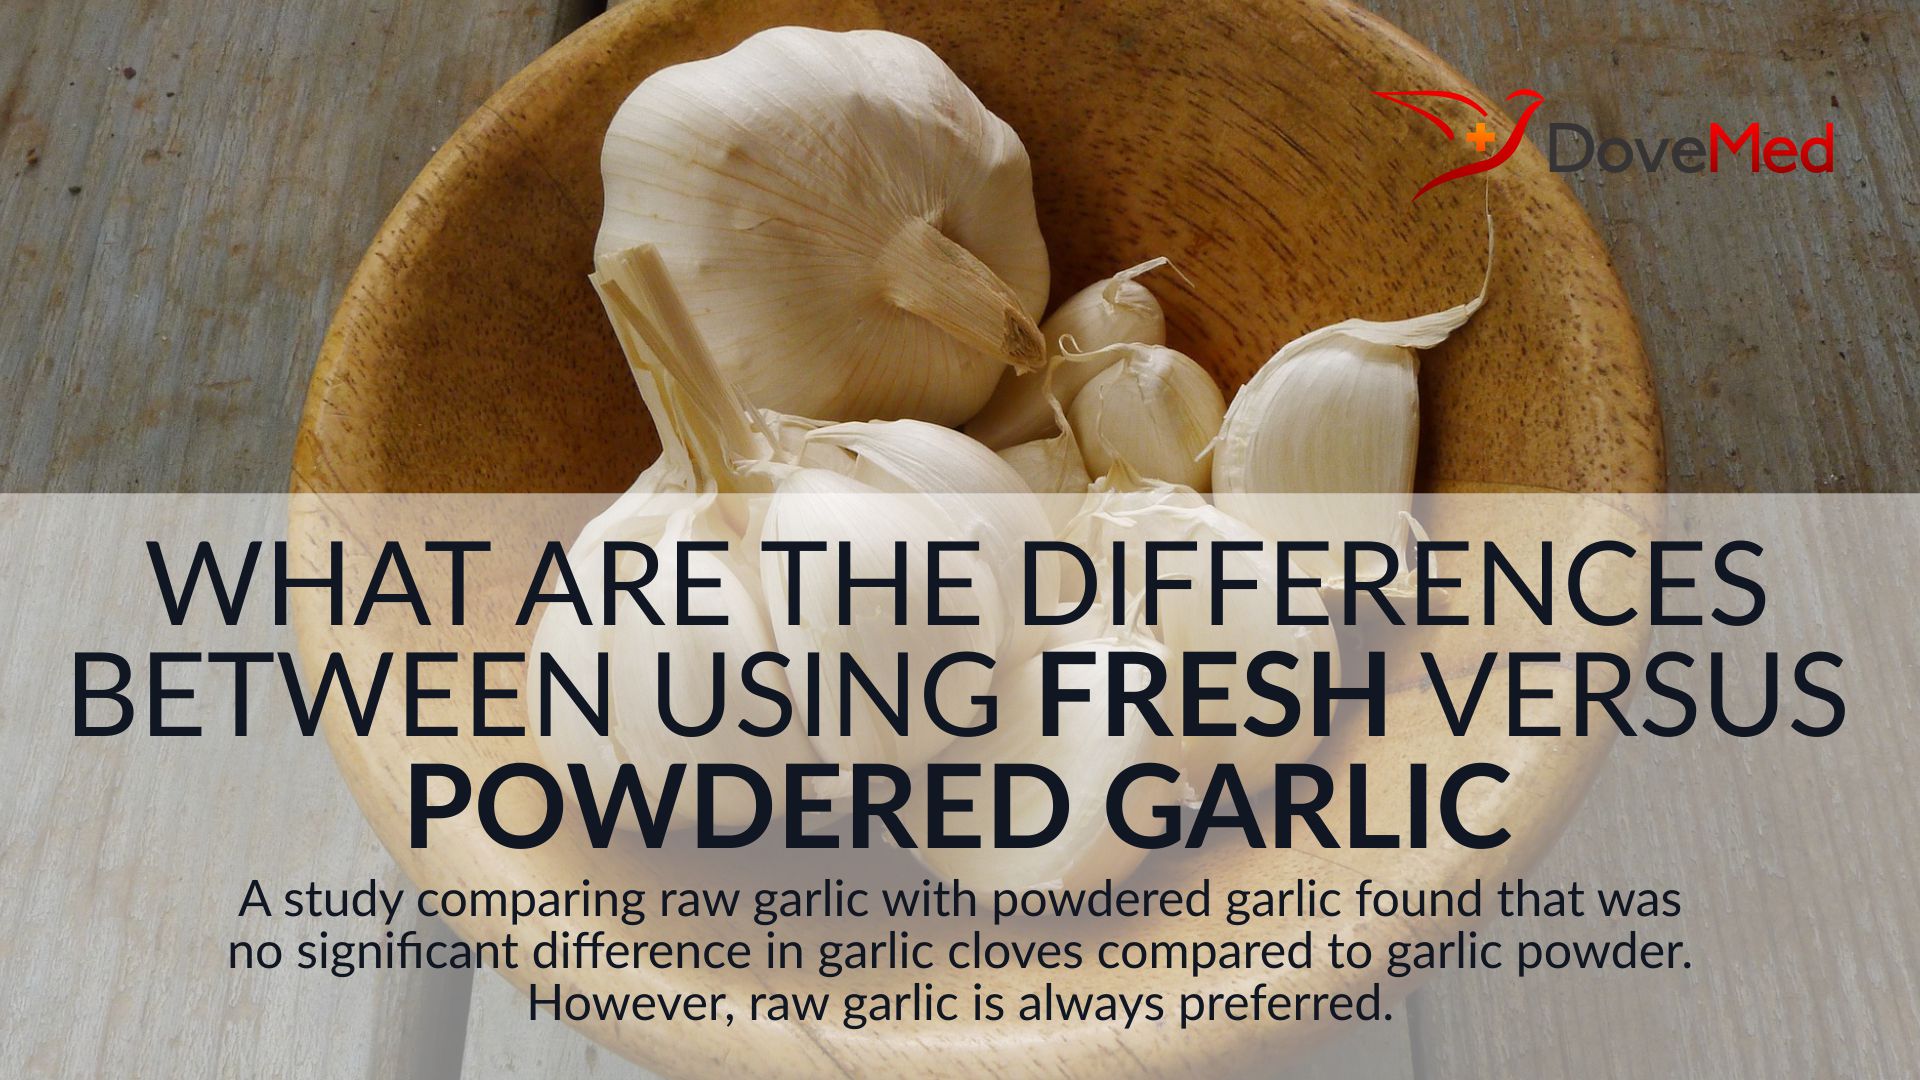 What Are The Differences Between Using Fresh Garlic Versus Garlic Powder? -  DoveMed